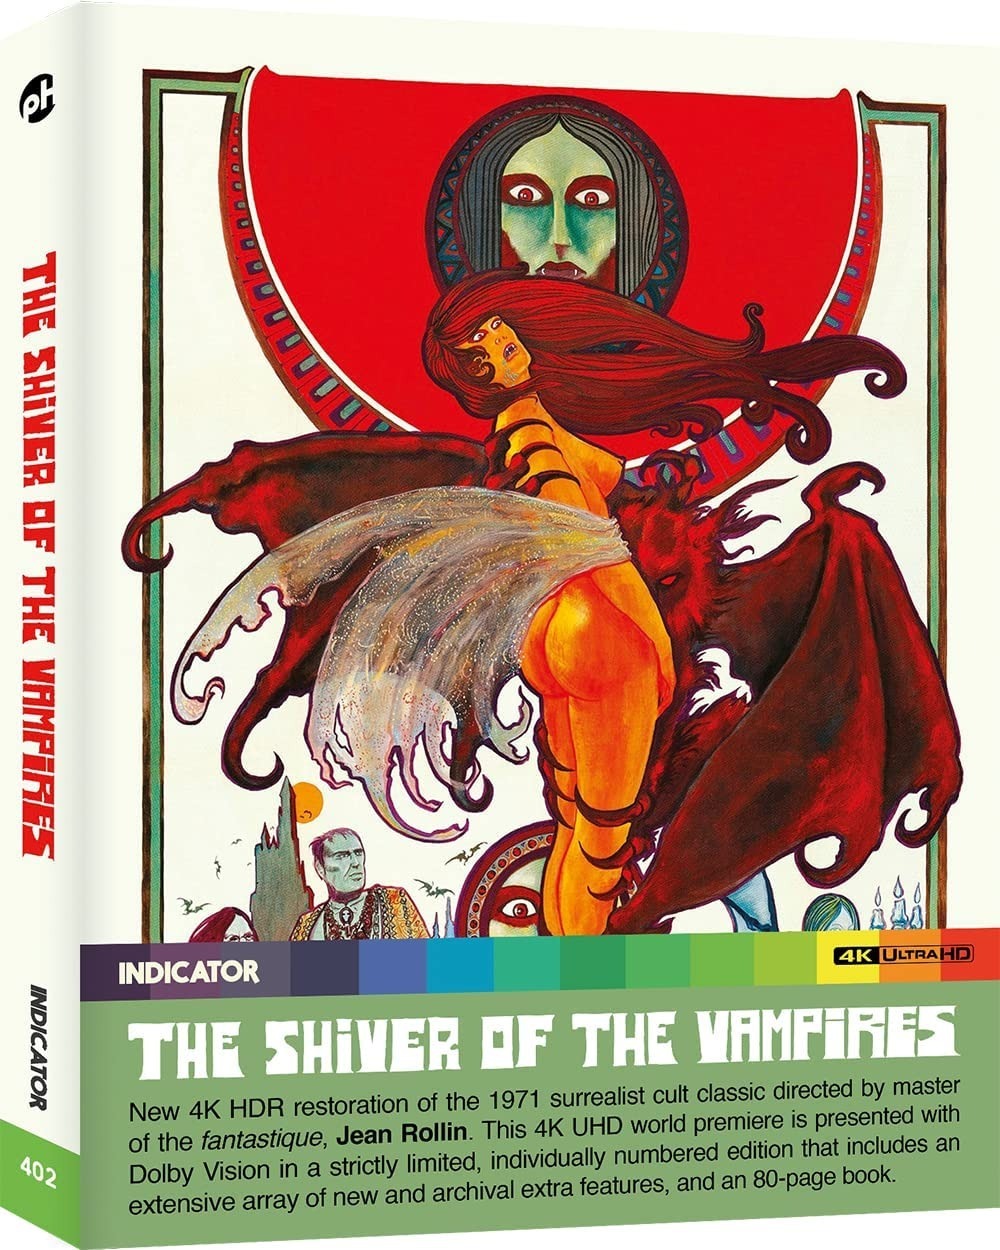 The Shiver of the Vampires 4K (1971) de Jean Rollin - front cover